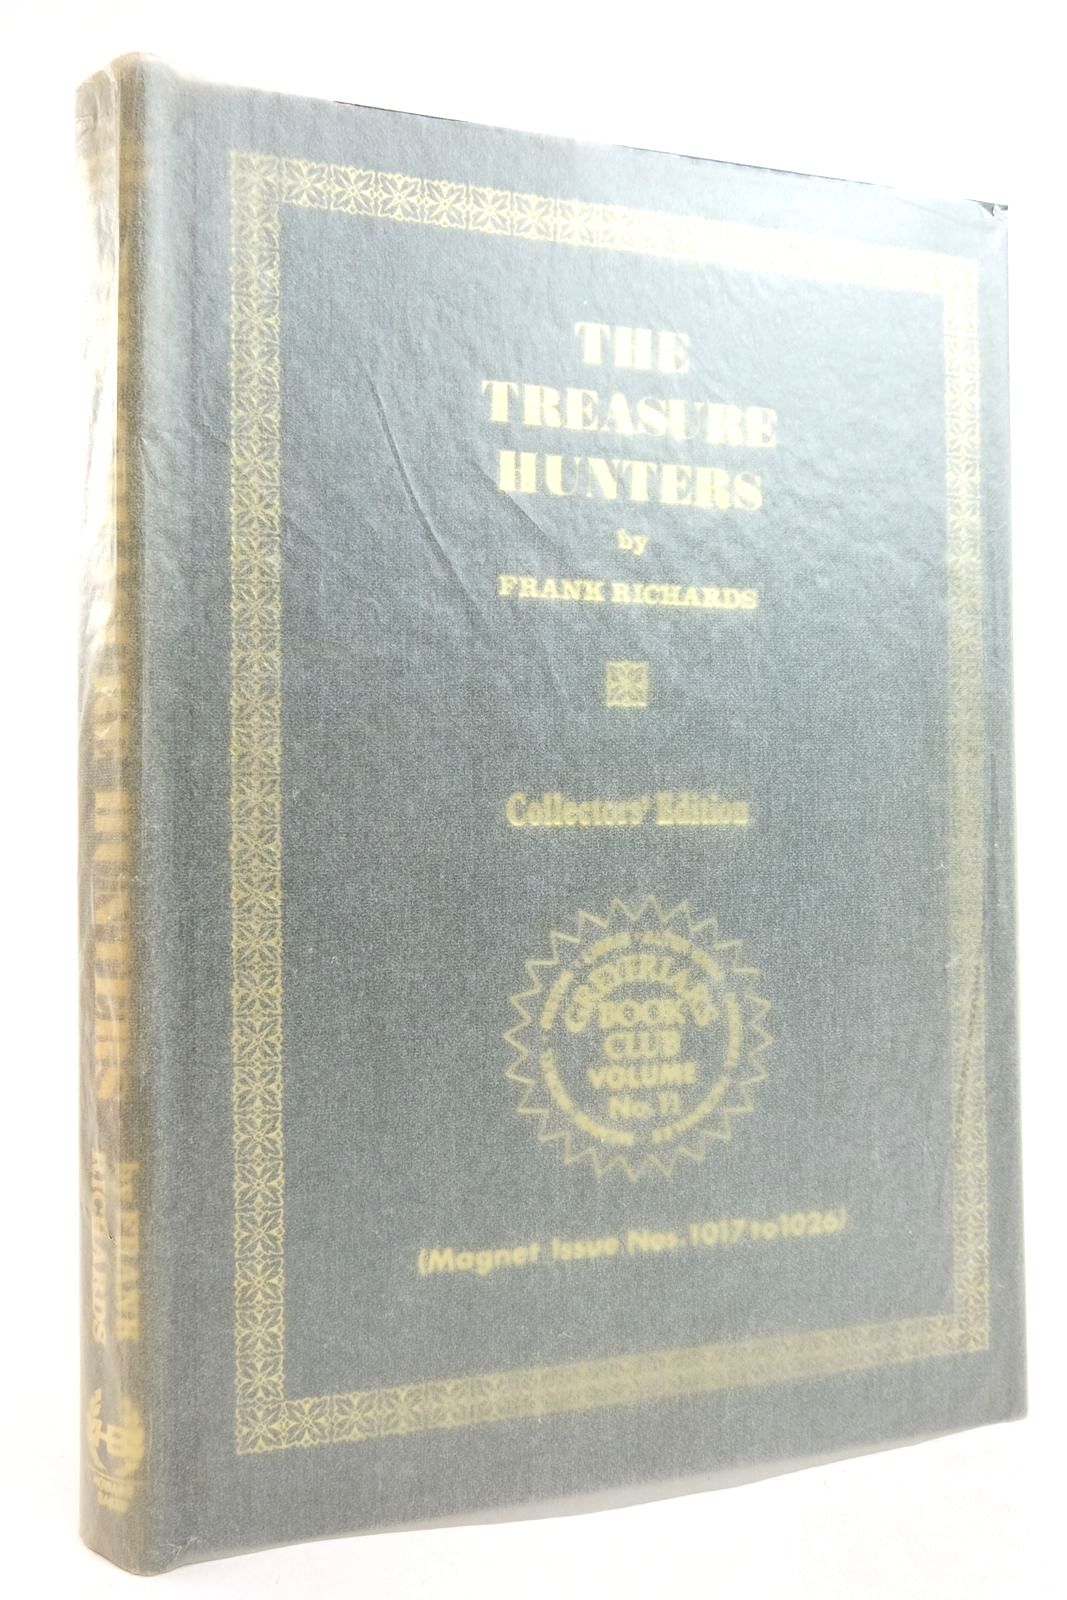 Photo of THE TREASURE HUNTERS written by Richards, Frank published by Howard Baker Press (STOCK CODE: 2136637)  for sale by Stella & Rose's Books